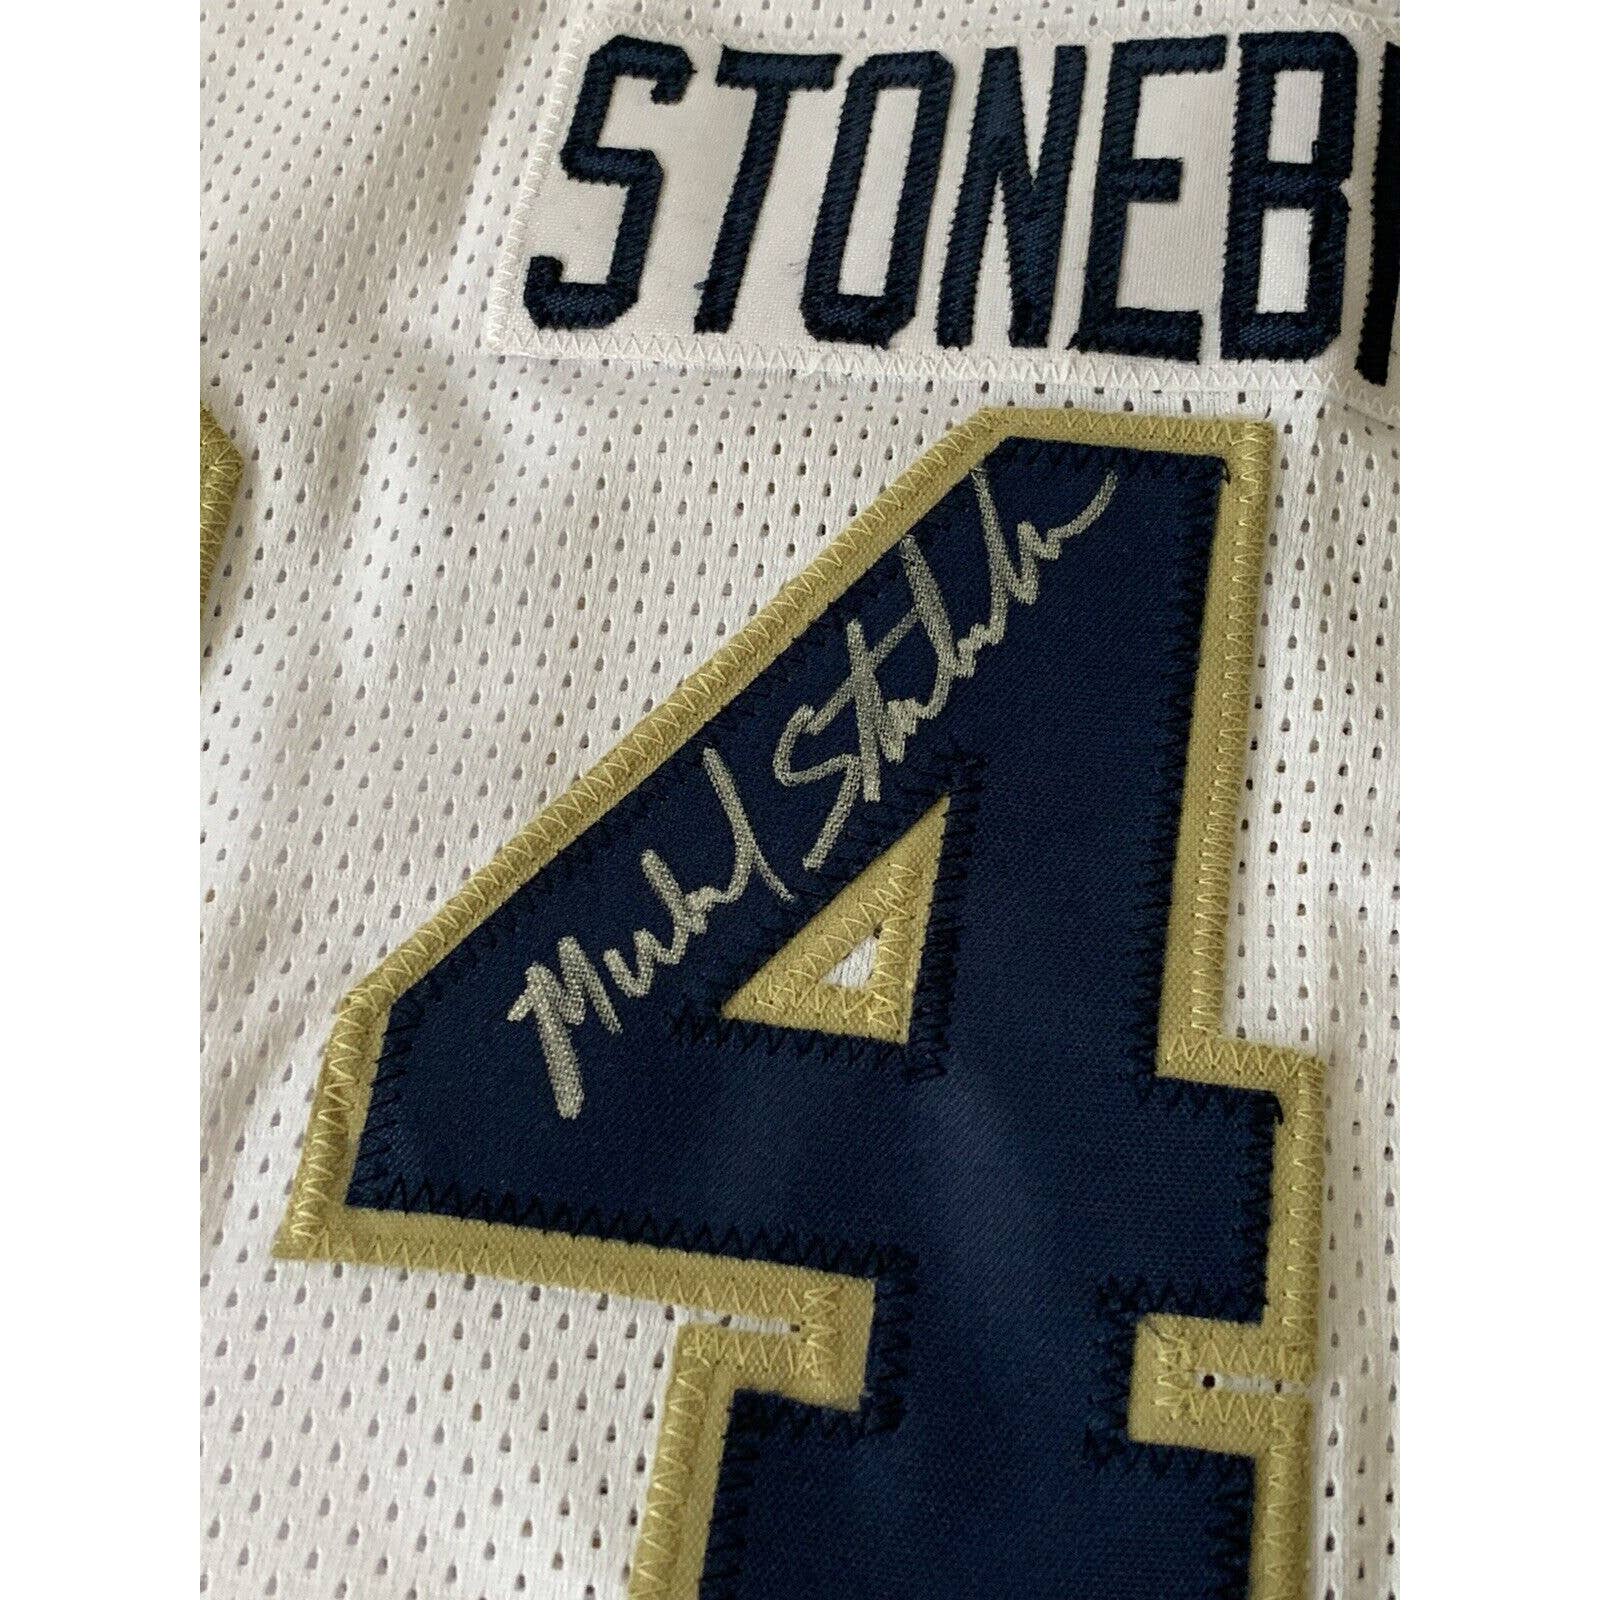 The Three Amigos Autographed/Signed Jersey Notre Dame Fighting Irish - TreasuresEvolved